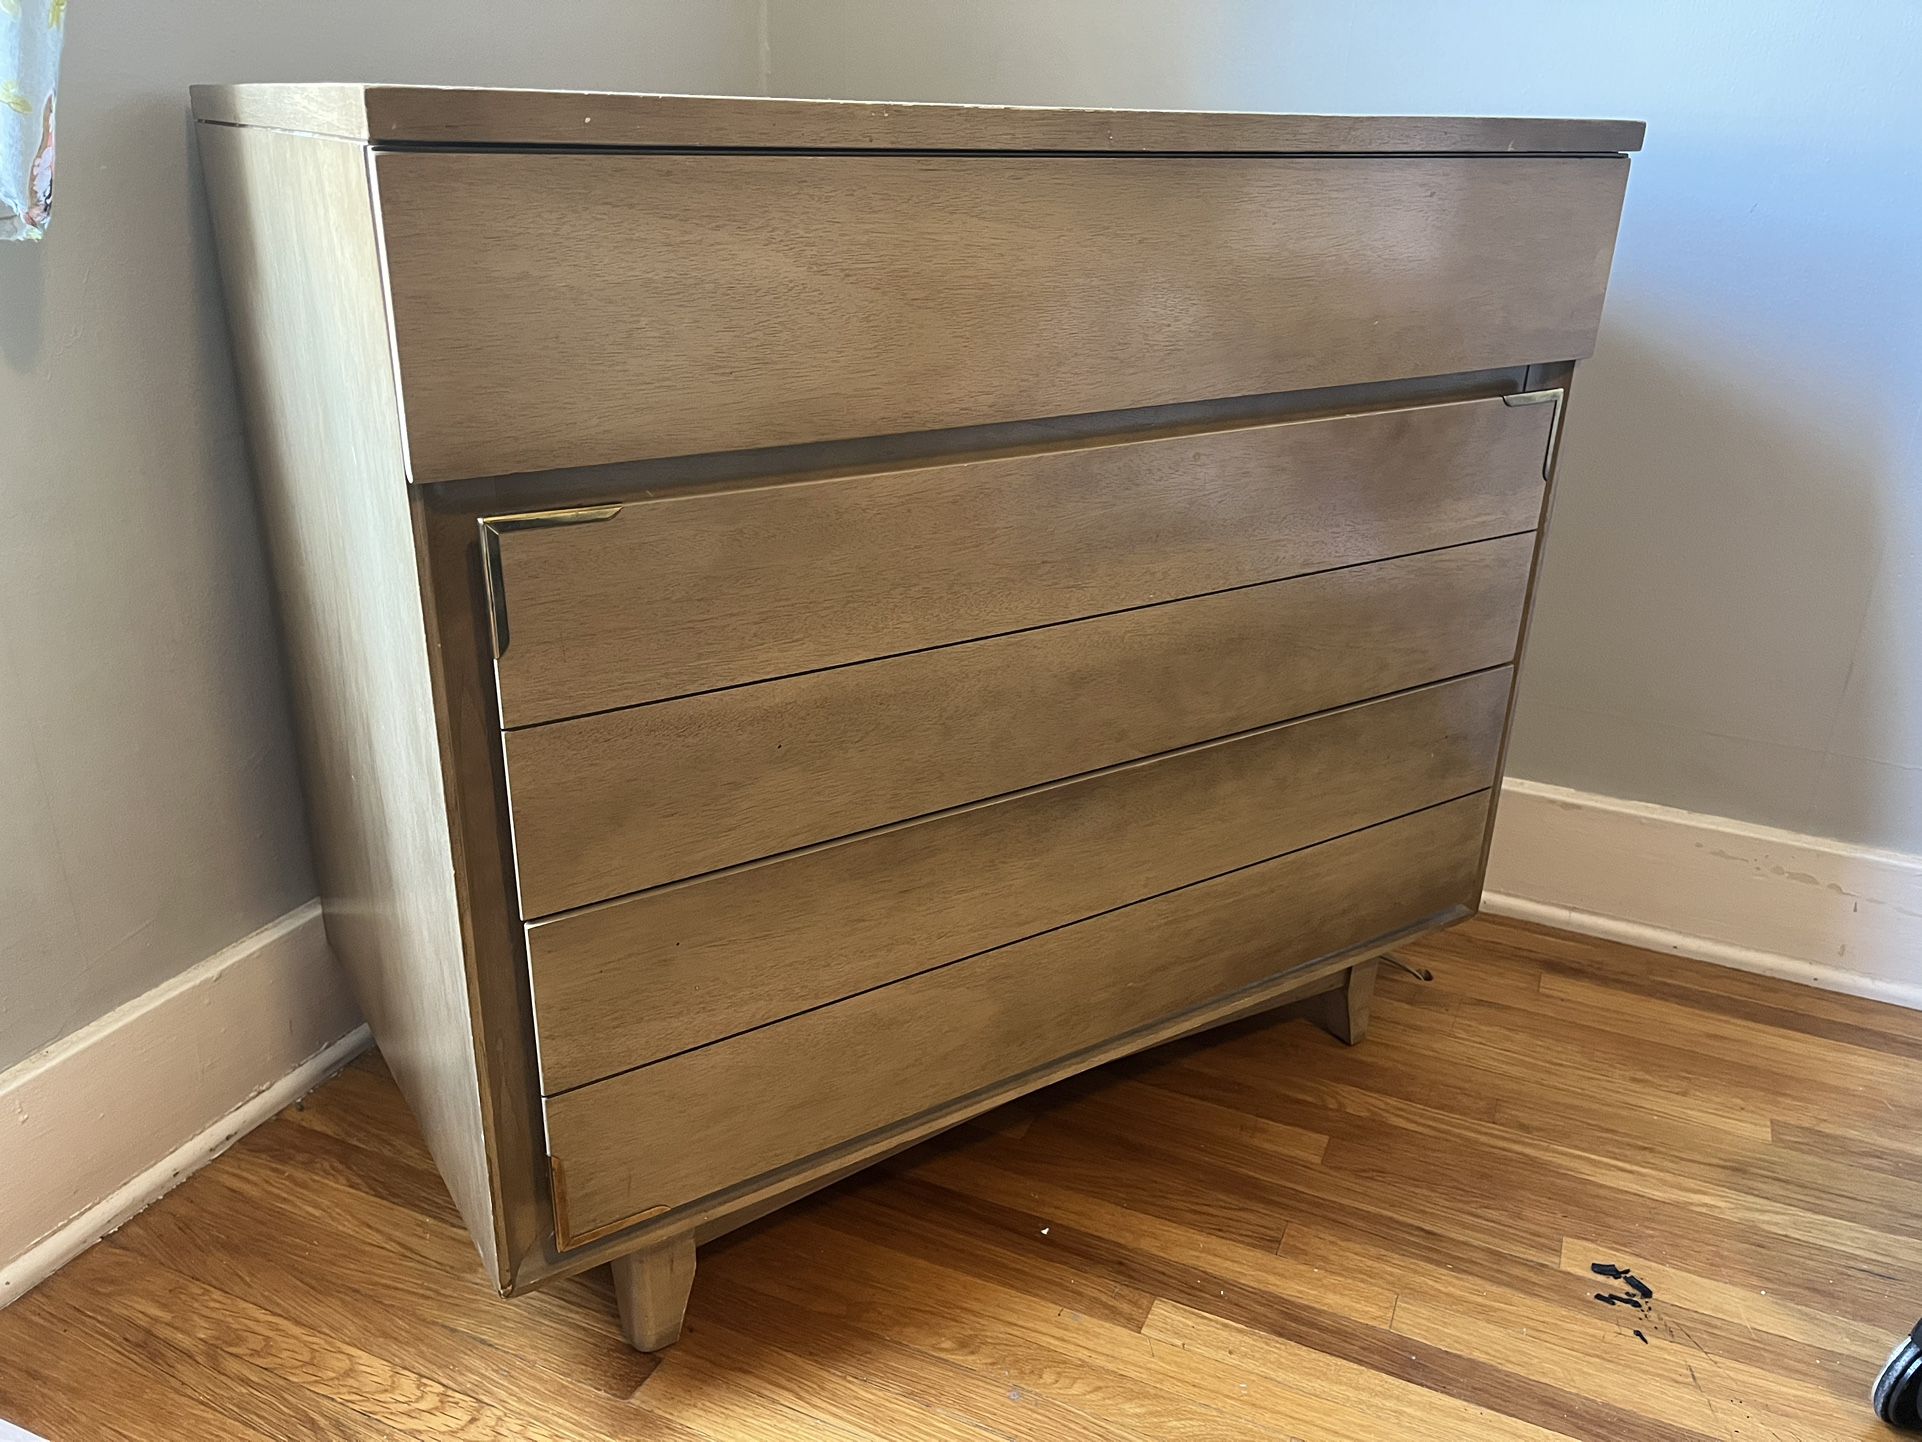 Mid century modern Chest Of drawers